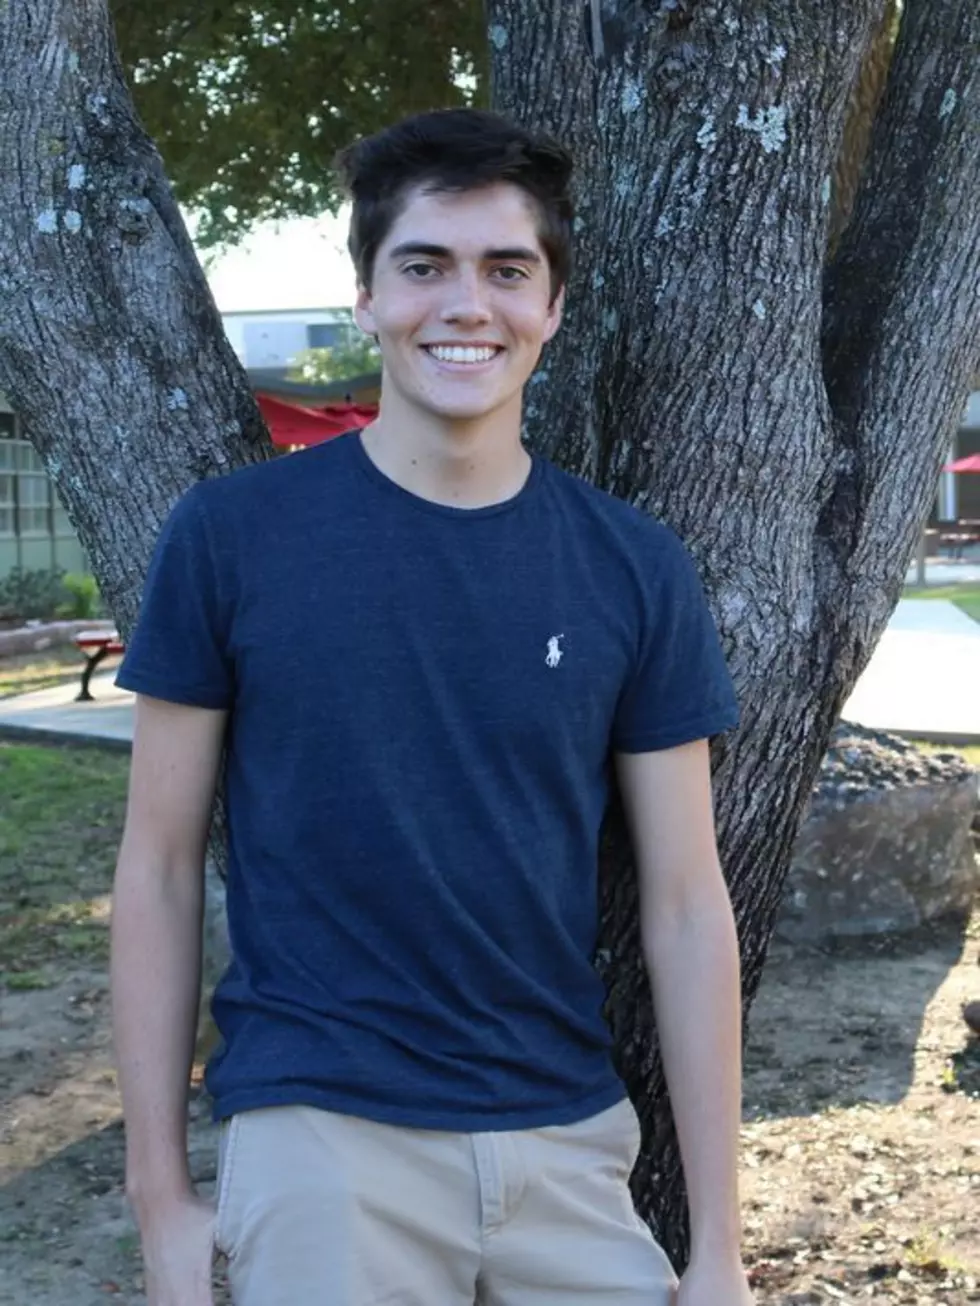 Louisiana Student Scores A Perfect 36 On ACT